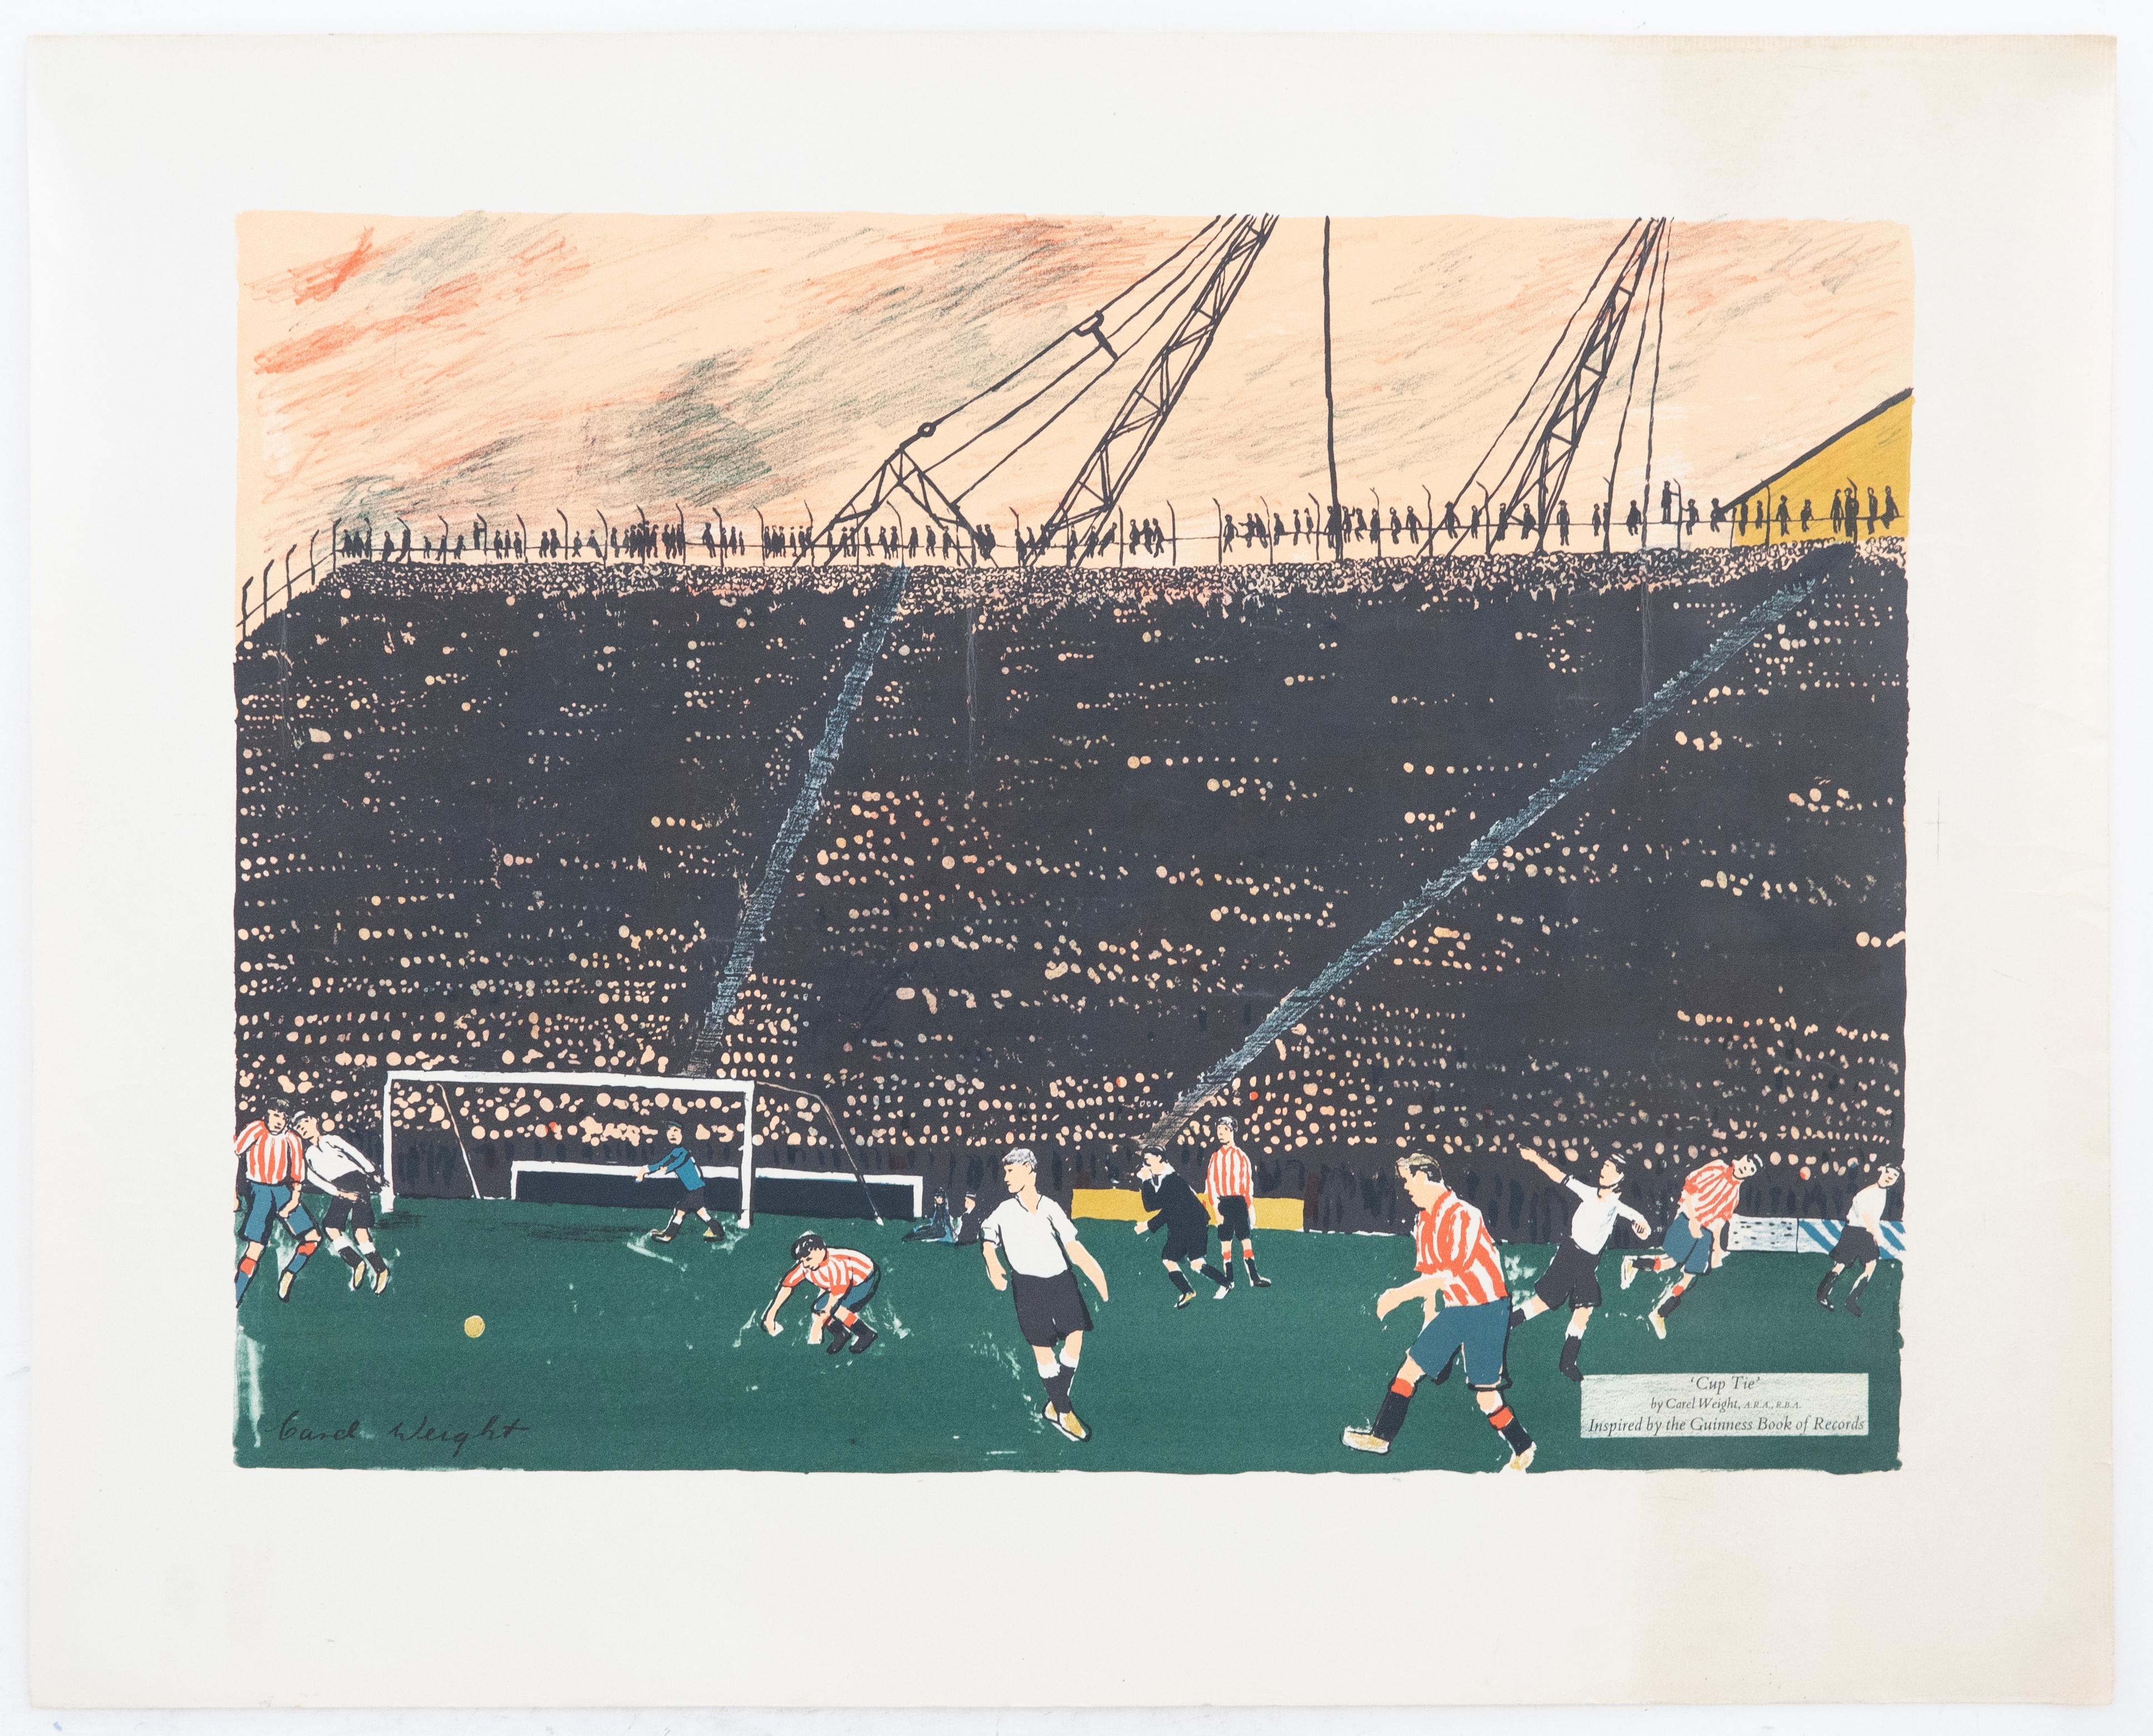 Carel Weight ARA, RBA (1908-1997) - 1962 Lithograph Poster, Cup Tie - Print by Unknown